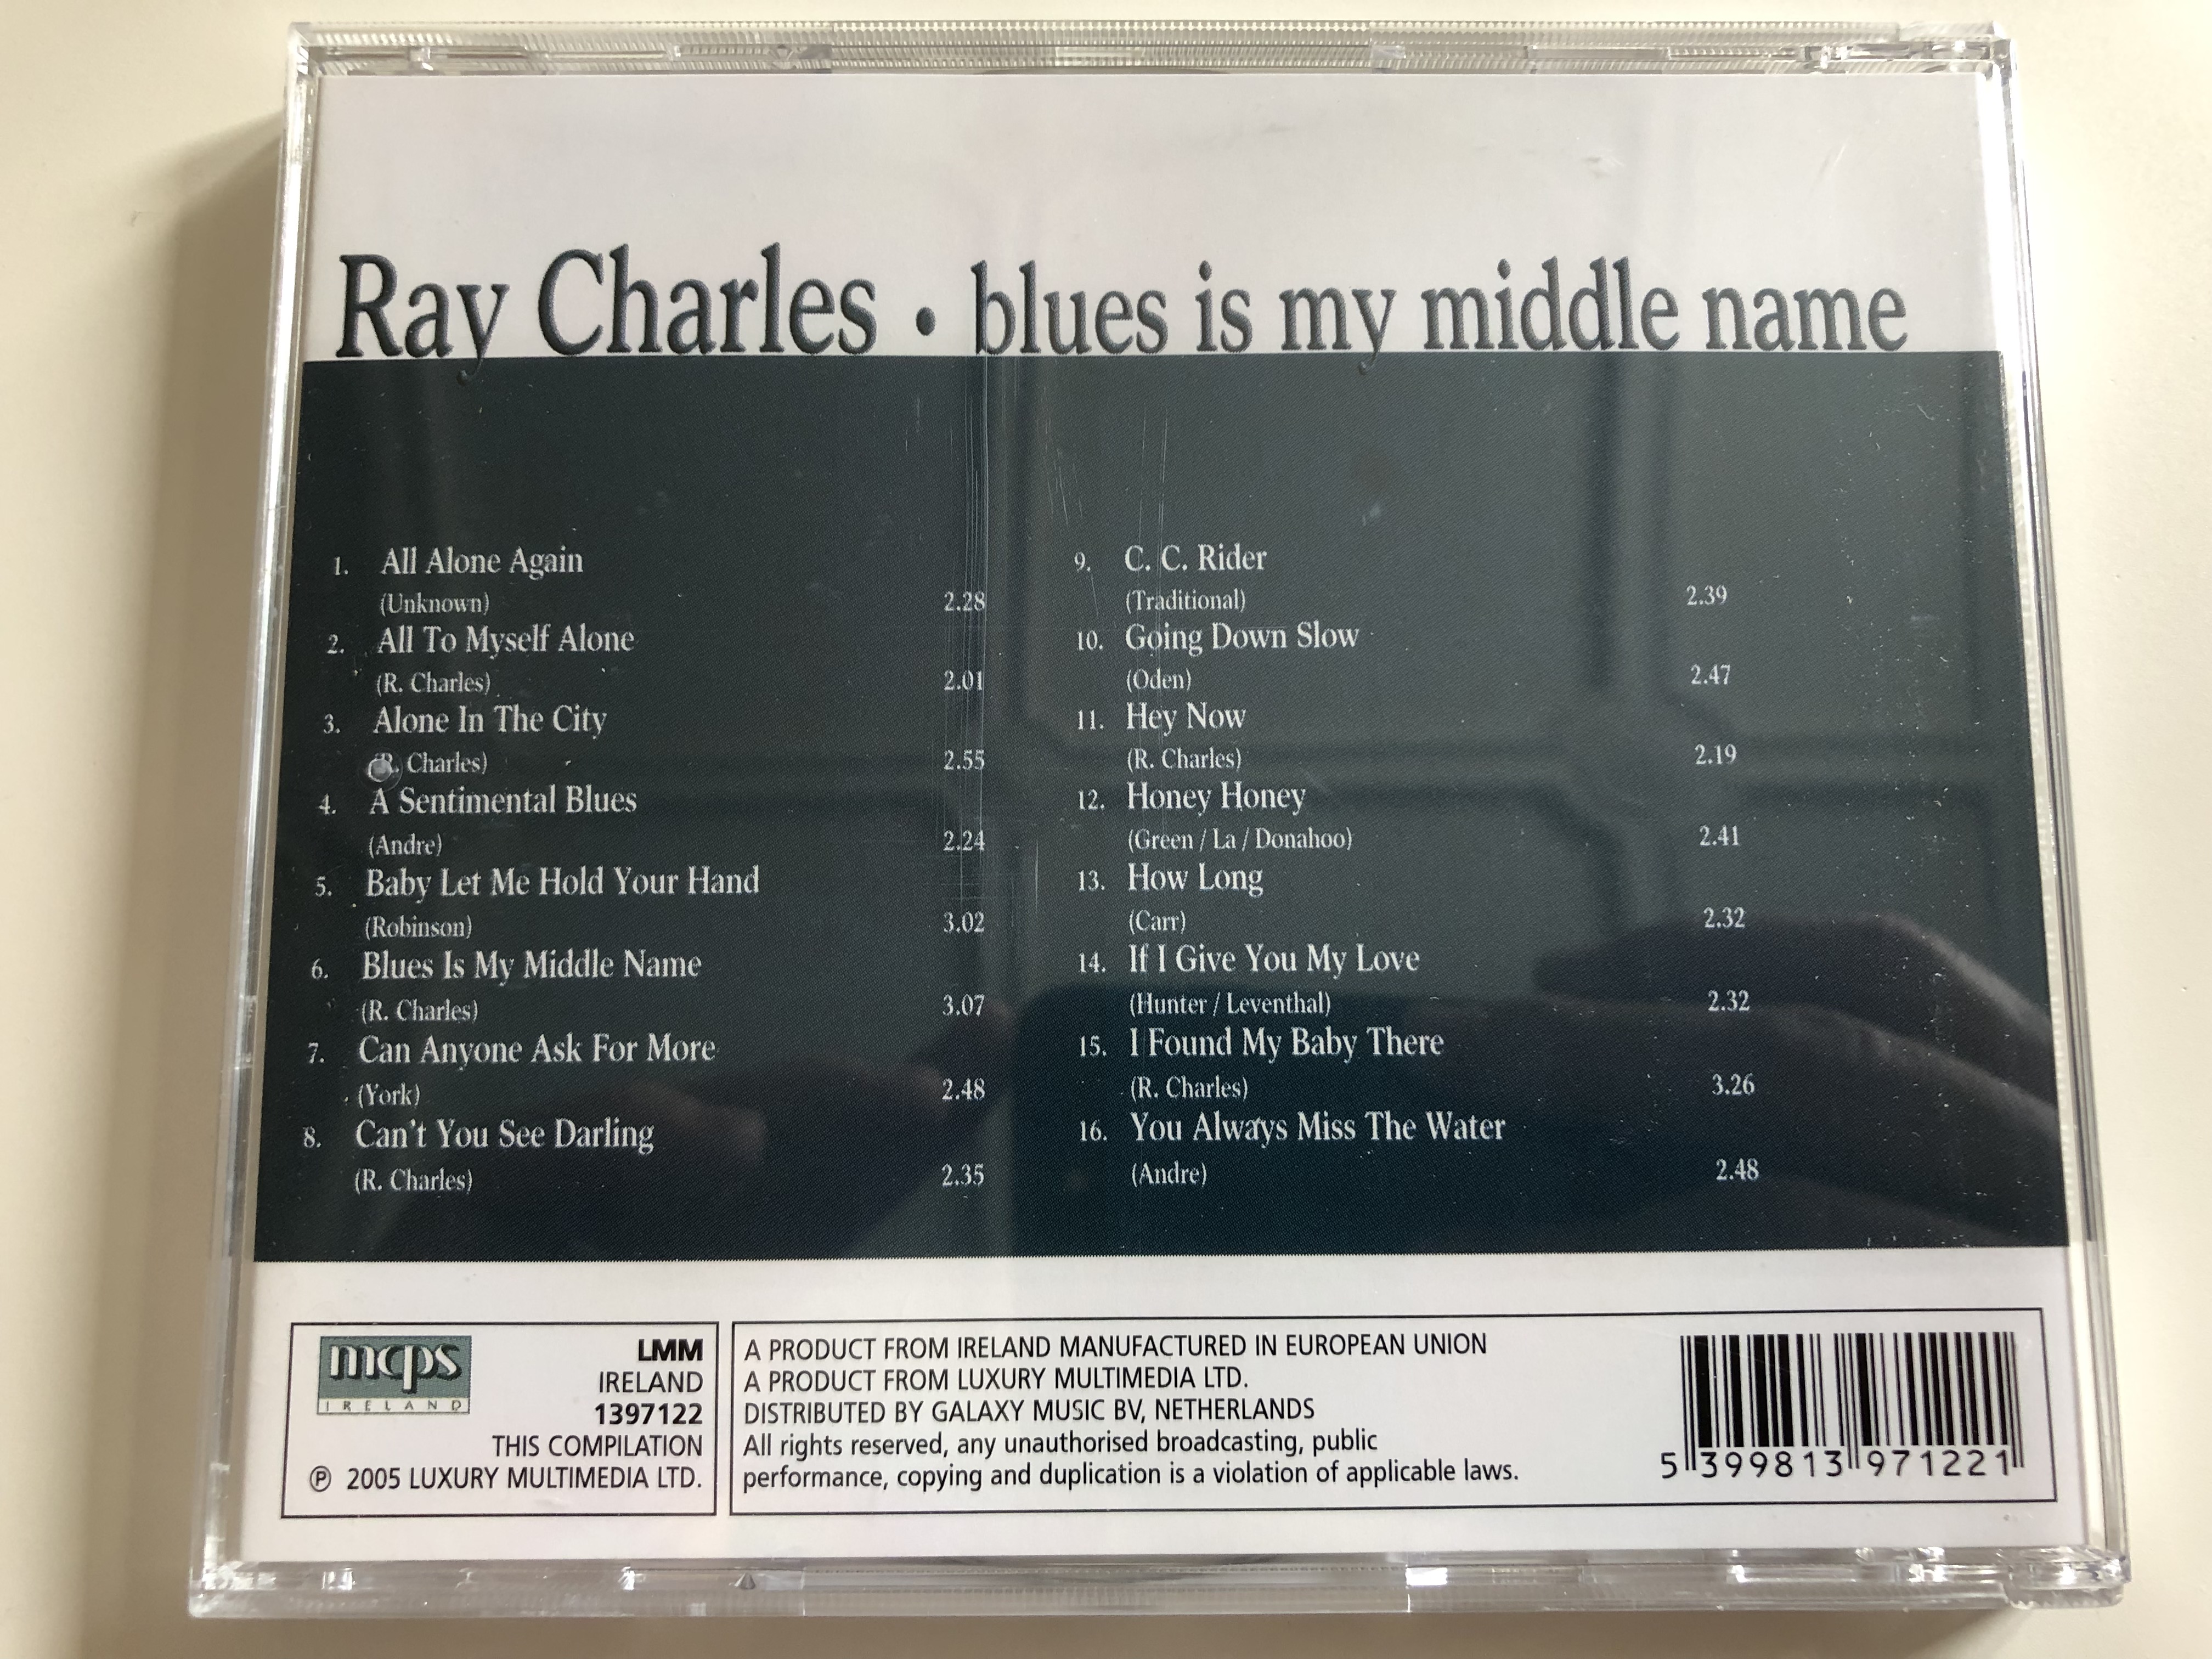 ray-charles-blues-is-my-middle-name-how-long-alone-in-the-city-audio-cd-2005-mm-1397122-4-.jpg